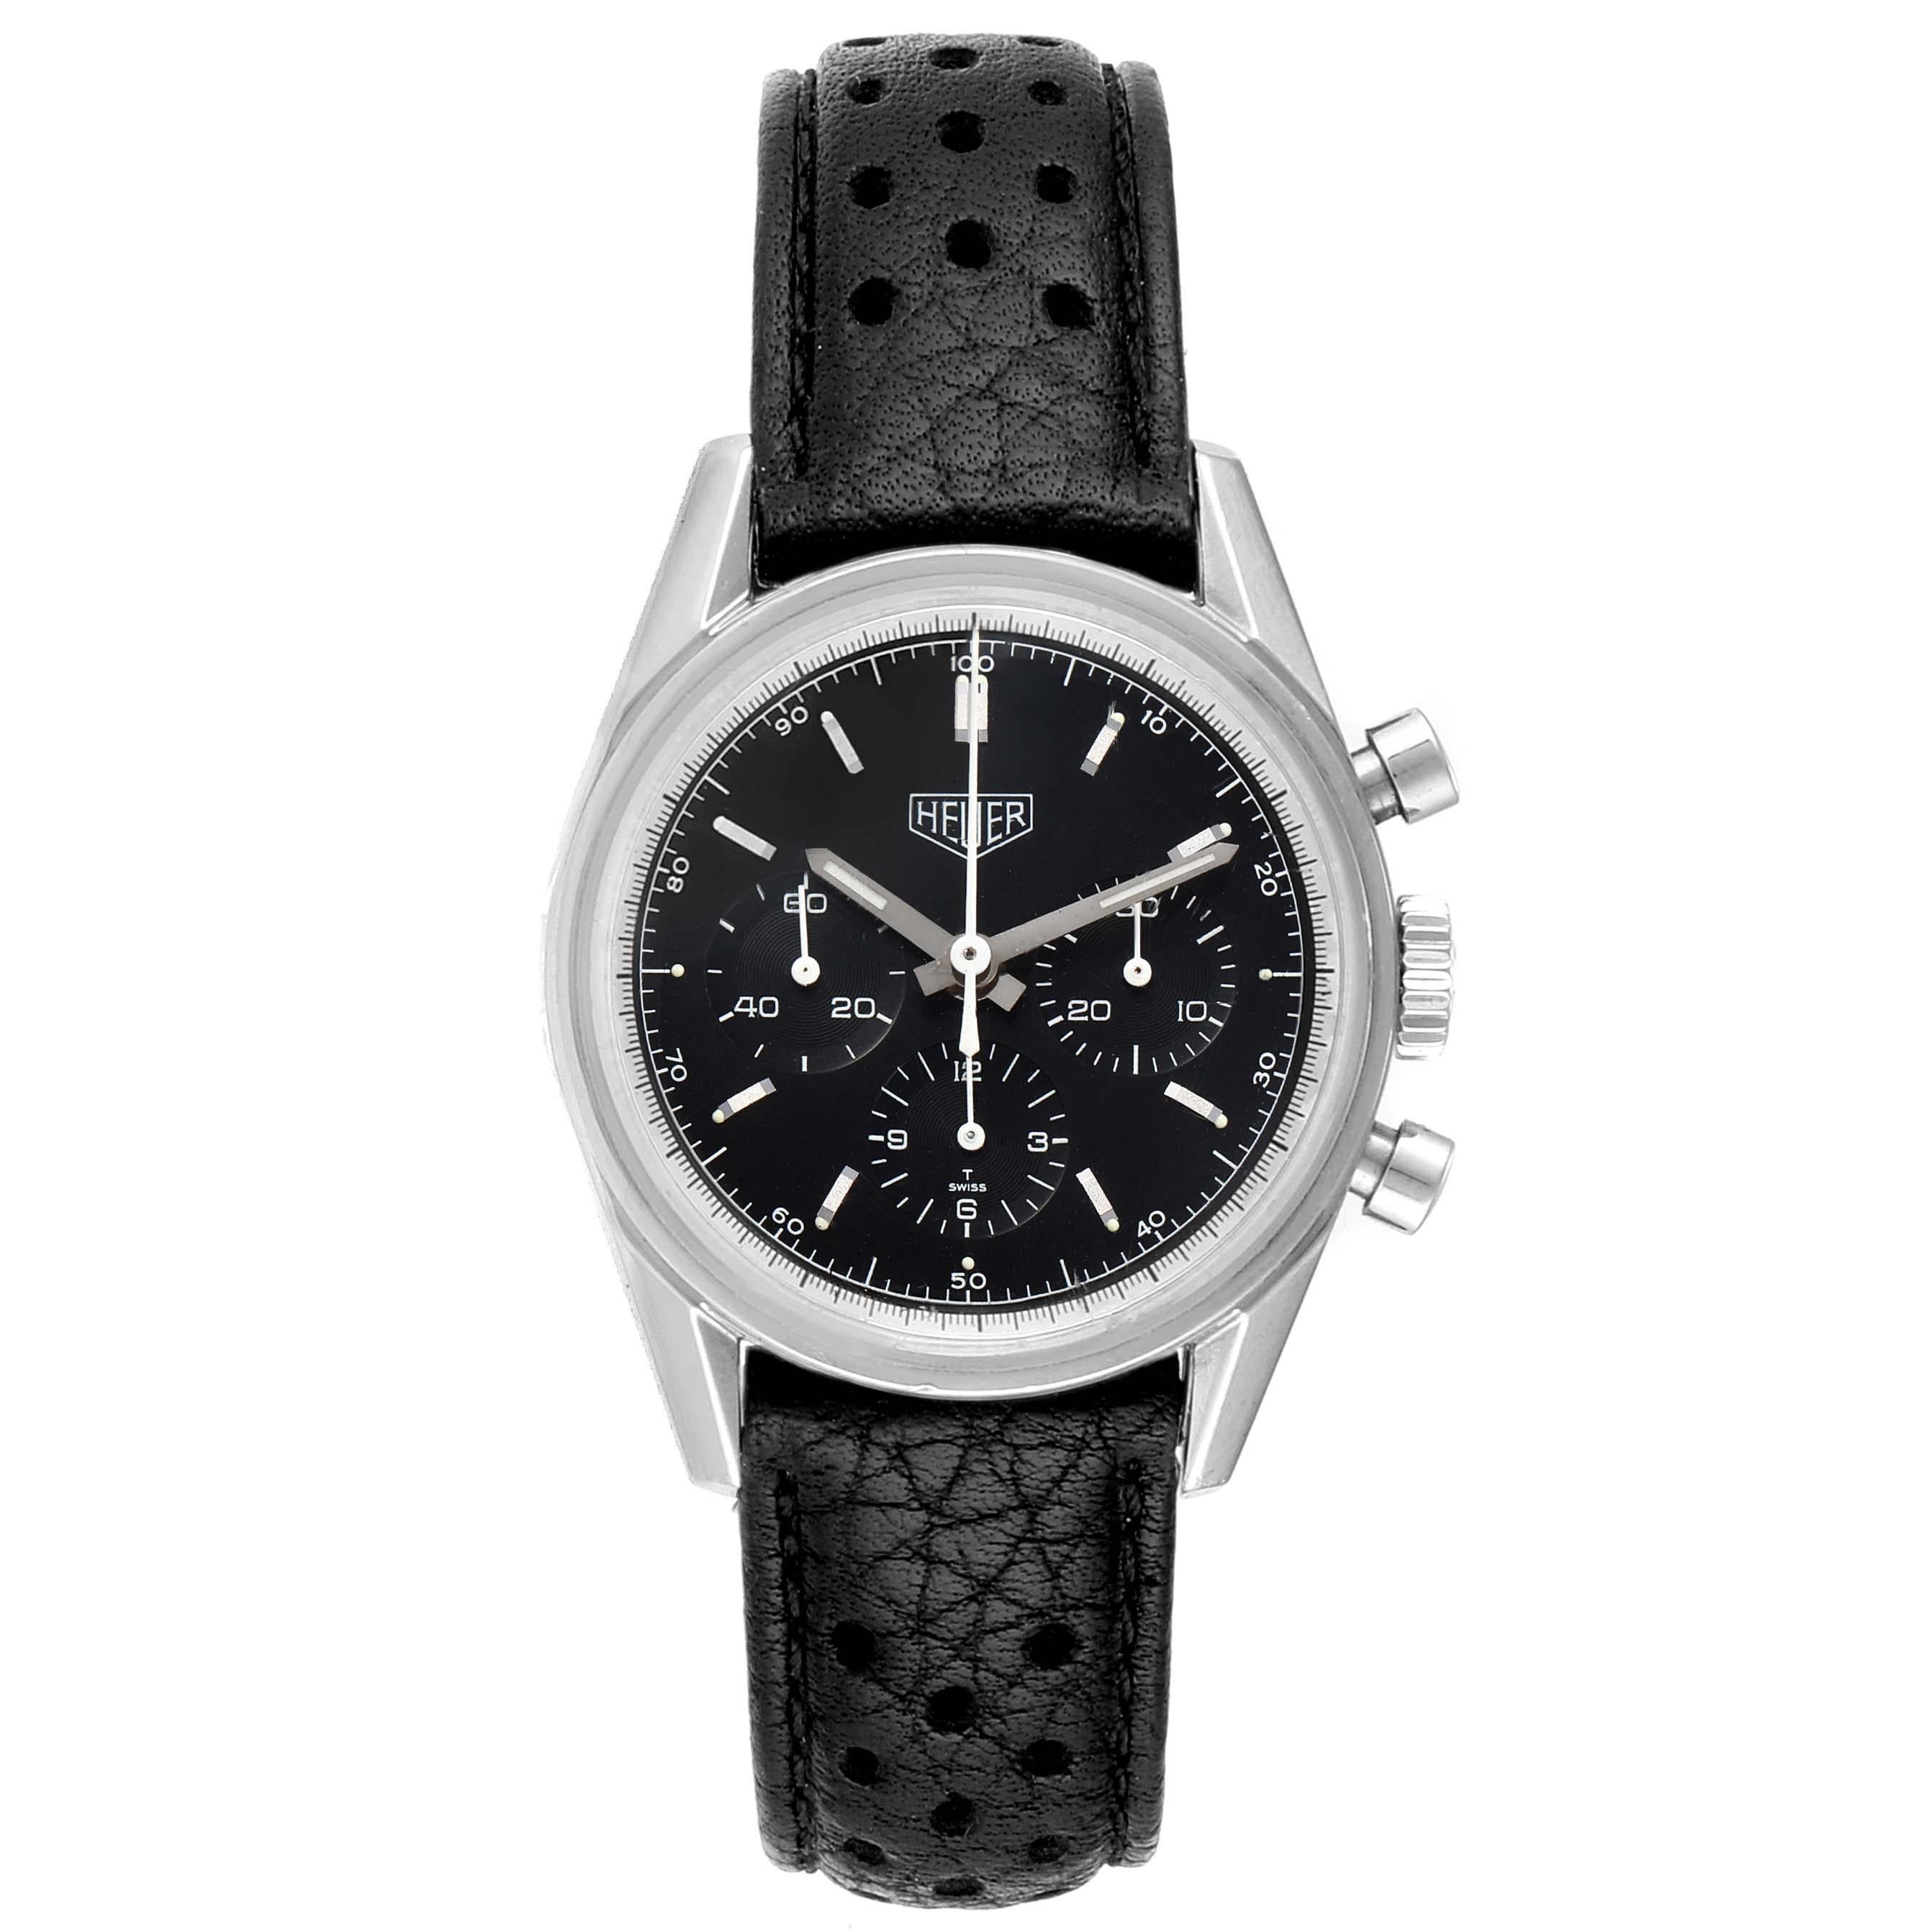 Tag Heuer Carrera Re-Edition Chronograph Steel Mens Watch CS3111 Box Card. Tag Heuer Calibre Lemania 1873 automaticself-winding chronograph movement. Stainless steel case 35 mm in diameter. Stainless steel bezel. Scratch resistant sapphire crystal.